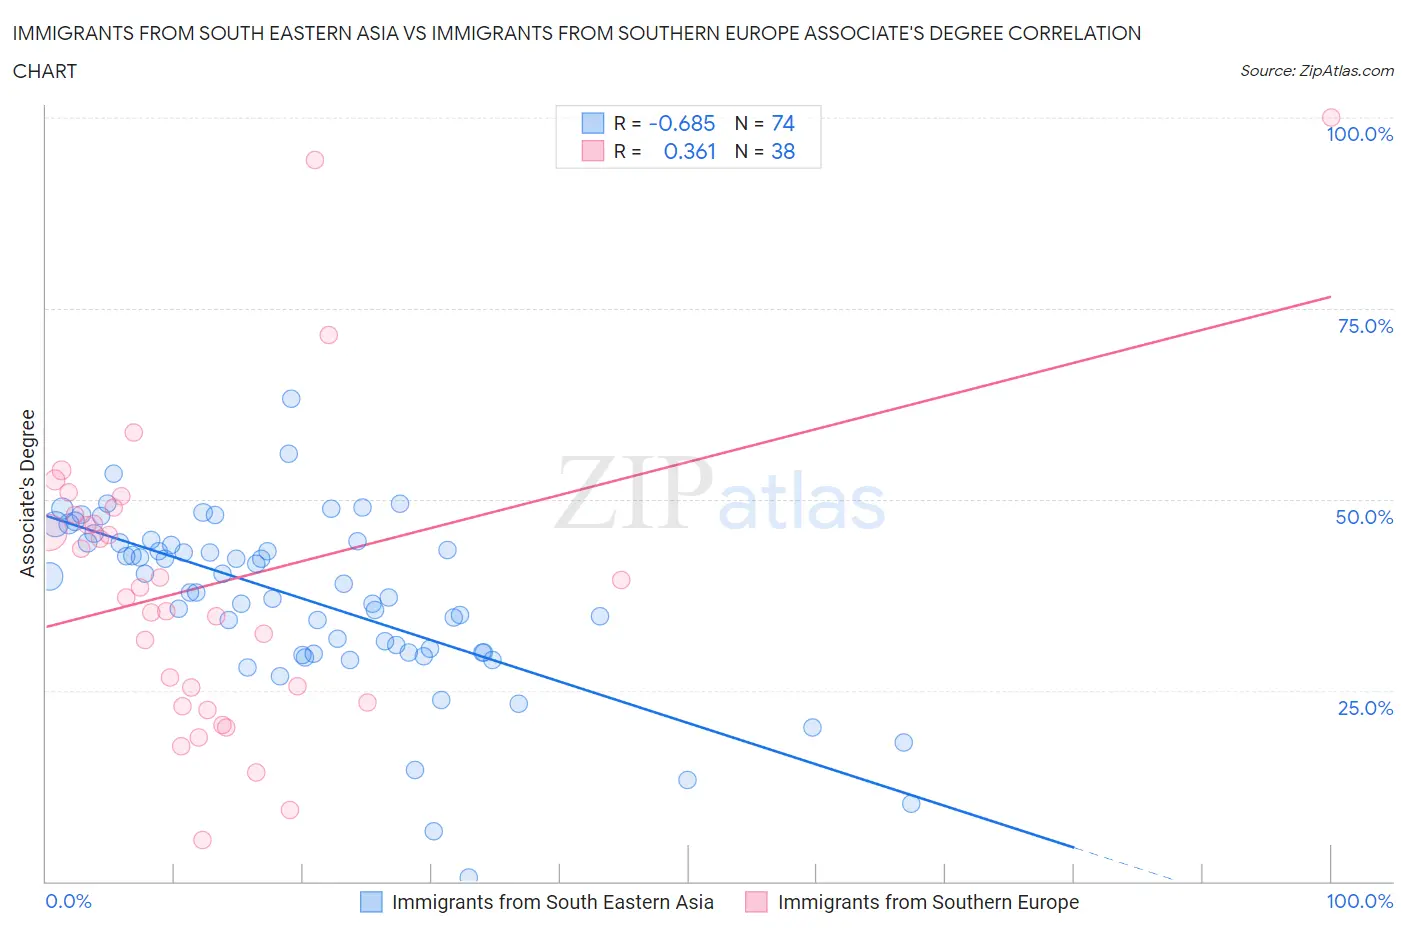 Immigrants from South Eastern Asia vs Immigrants from Southern Europe Associate's Degree